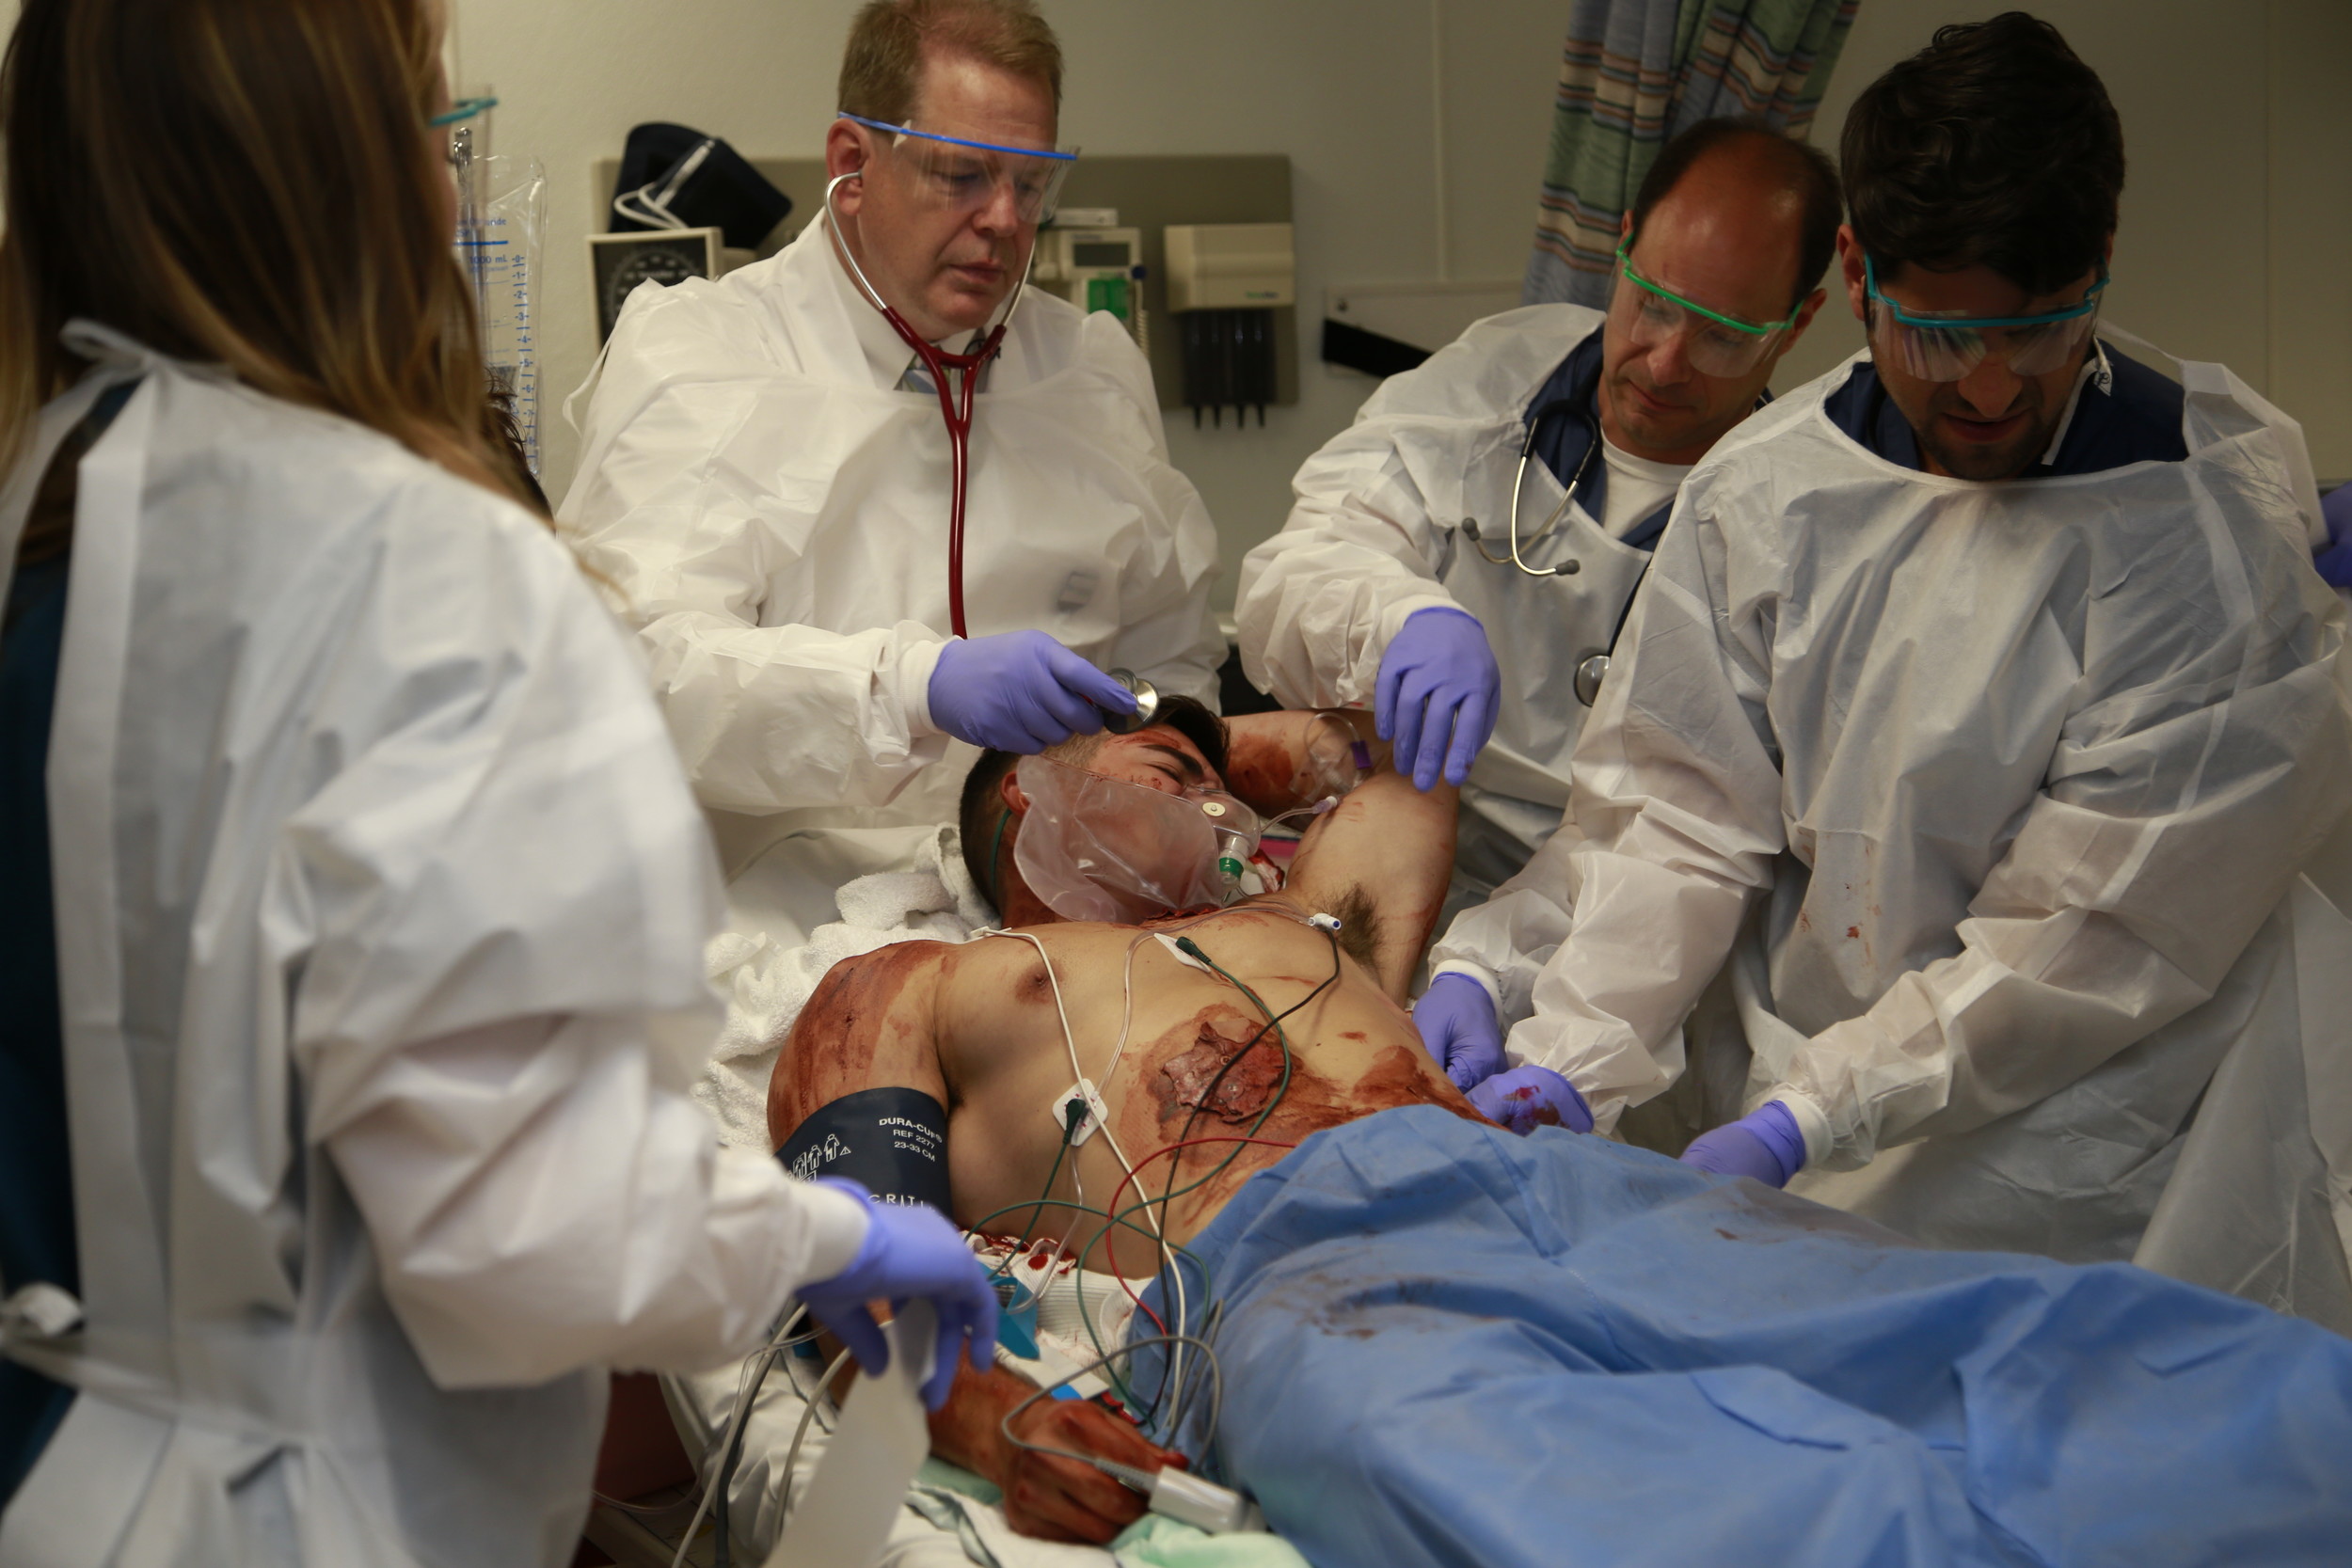 South Nassau Communities Hospital emergency room doctors and nurses tended to a volunteer patient during a demonstration of the hospital’s Level II trauma readiness on July 19.